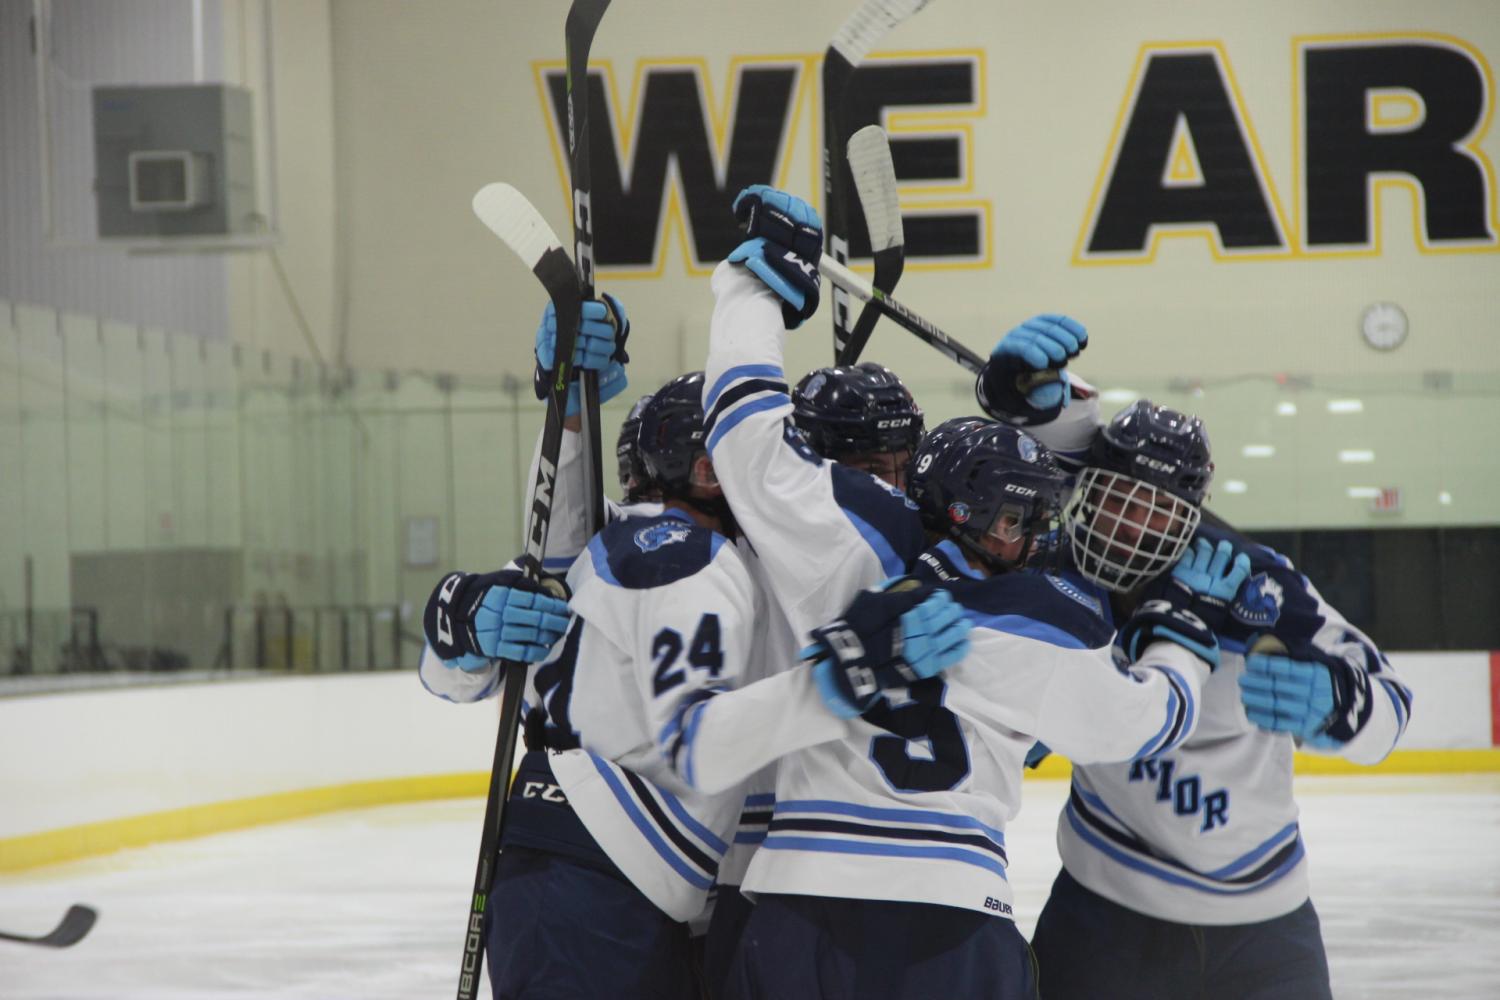 Starting Spartans celebrate their 2nd goal of the game